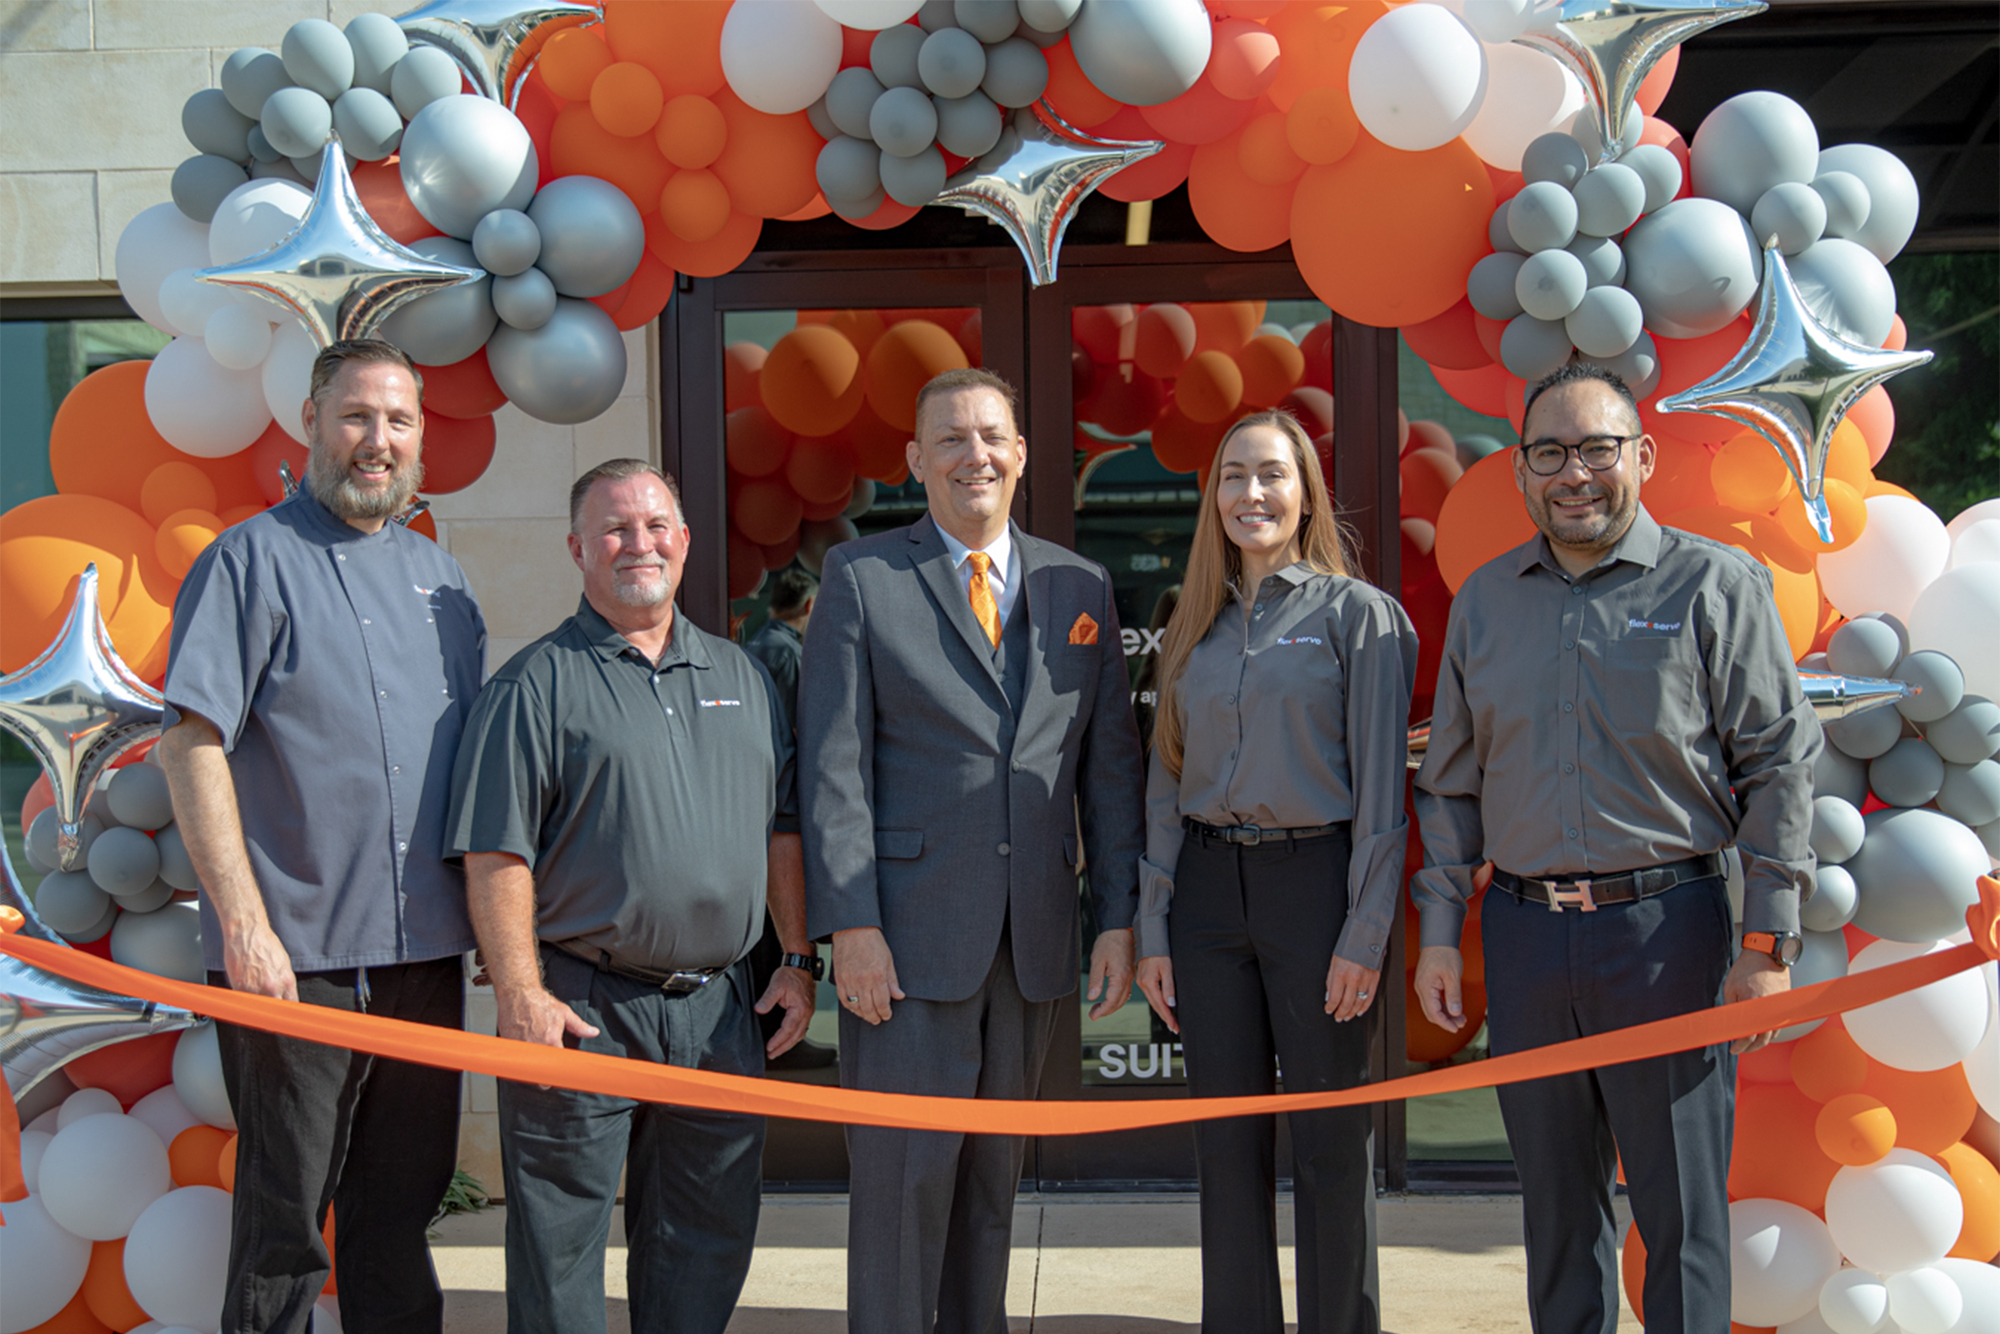 The Flexeserve Inc. team: [L-R] Director of Culinary – Adam Dyer, VP of Technical Service – Patrick Walker, President  – Dave Hinton, Office Manager – Katie Brewer and VP of Sales – Michael Torrescano